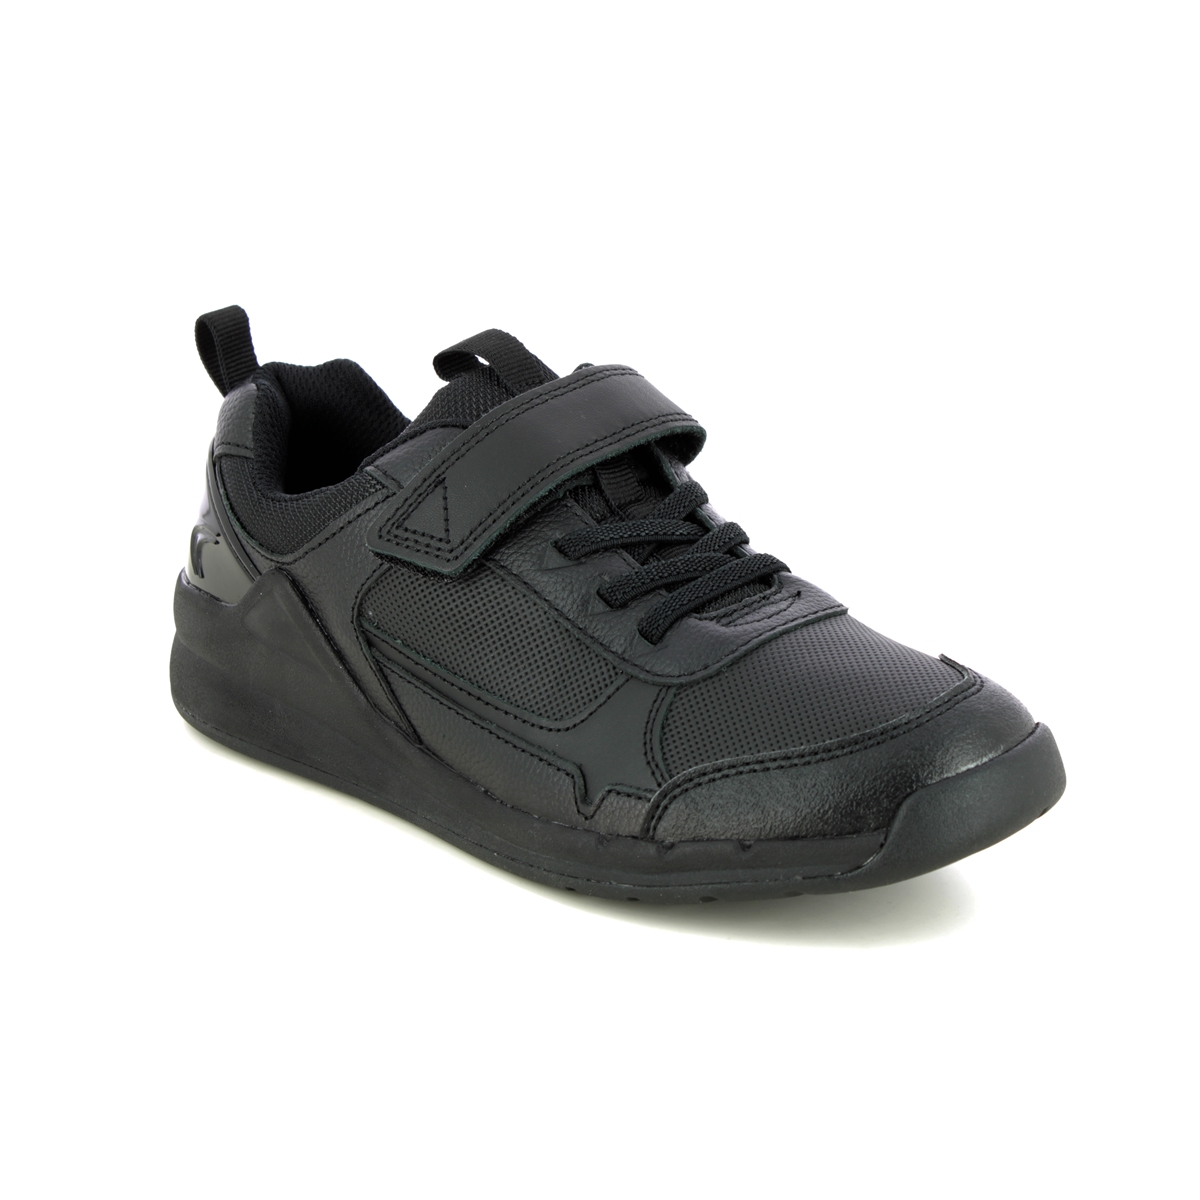 Clarks Orbit Sprint Y Black Leather Kids Boys Shoes 534746F In Size 6 In Plain Black Leather F Width Fitting Regular Fit For School For kids